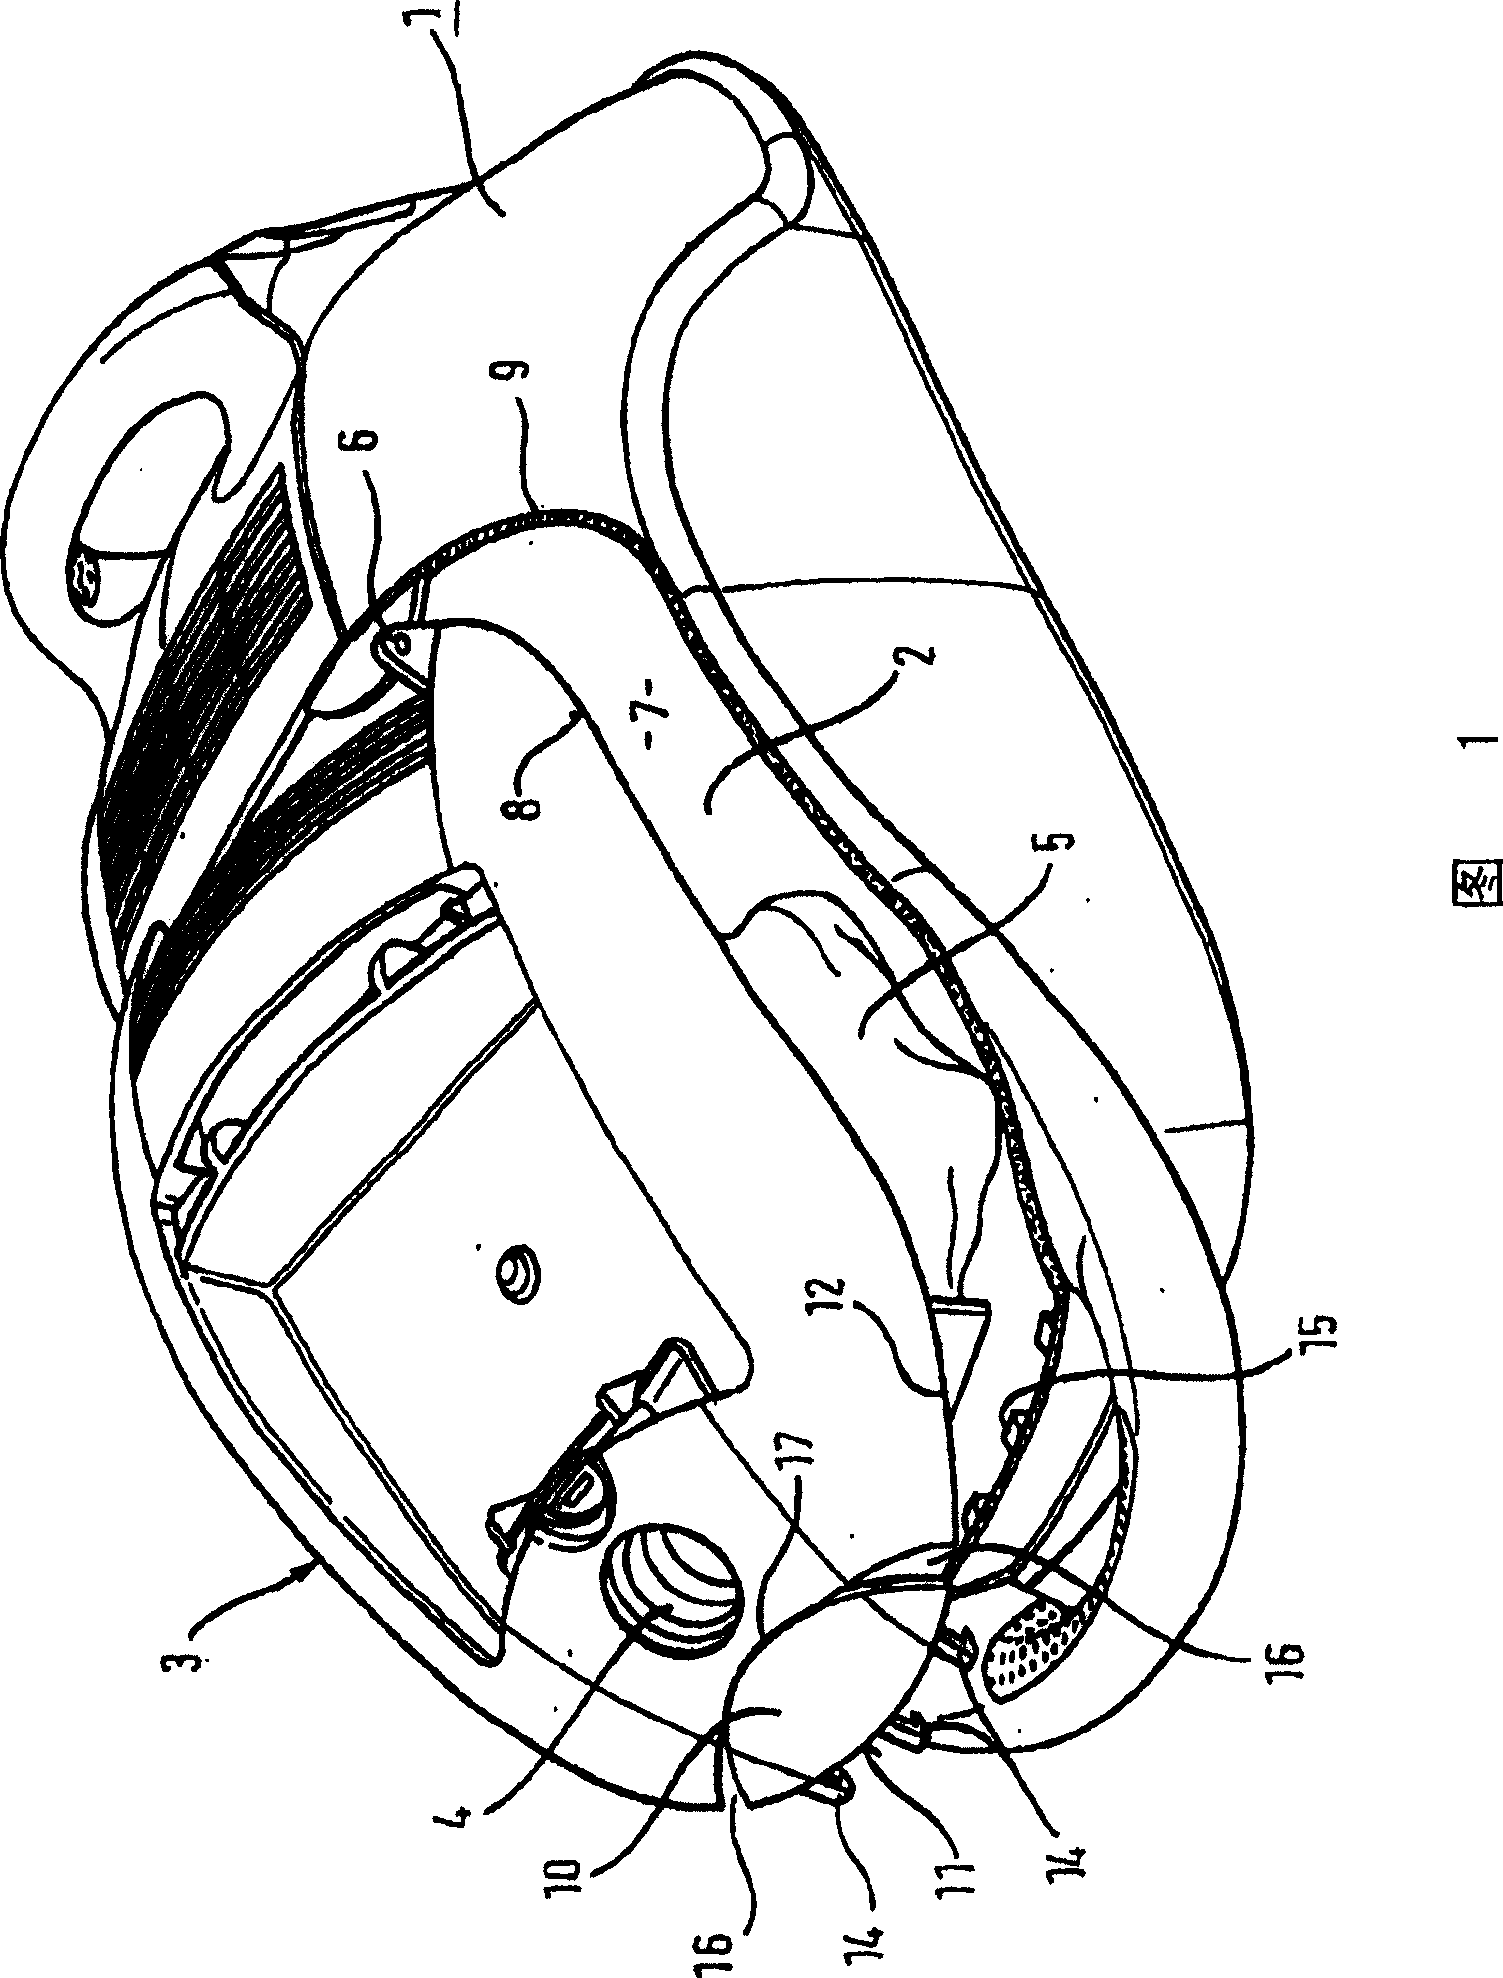 Vacuum cleaner comprising an actuating element for the cover